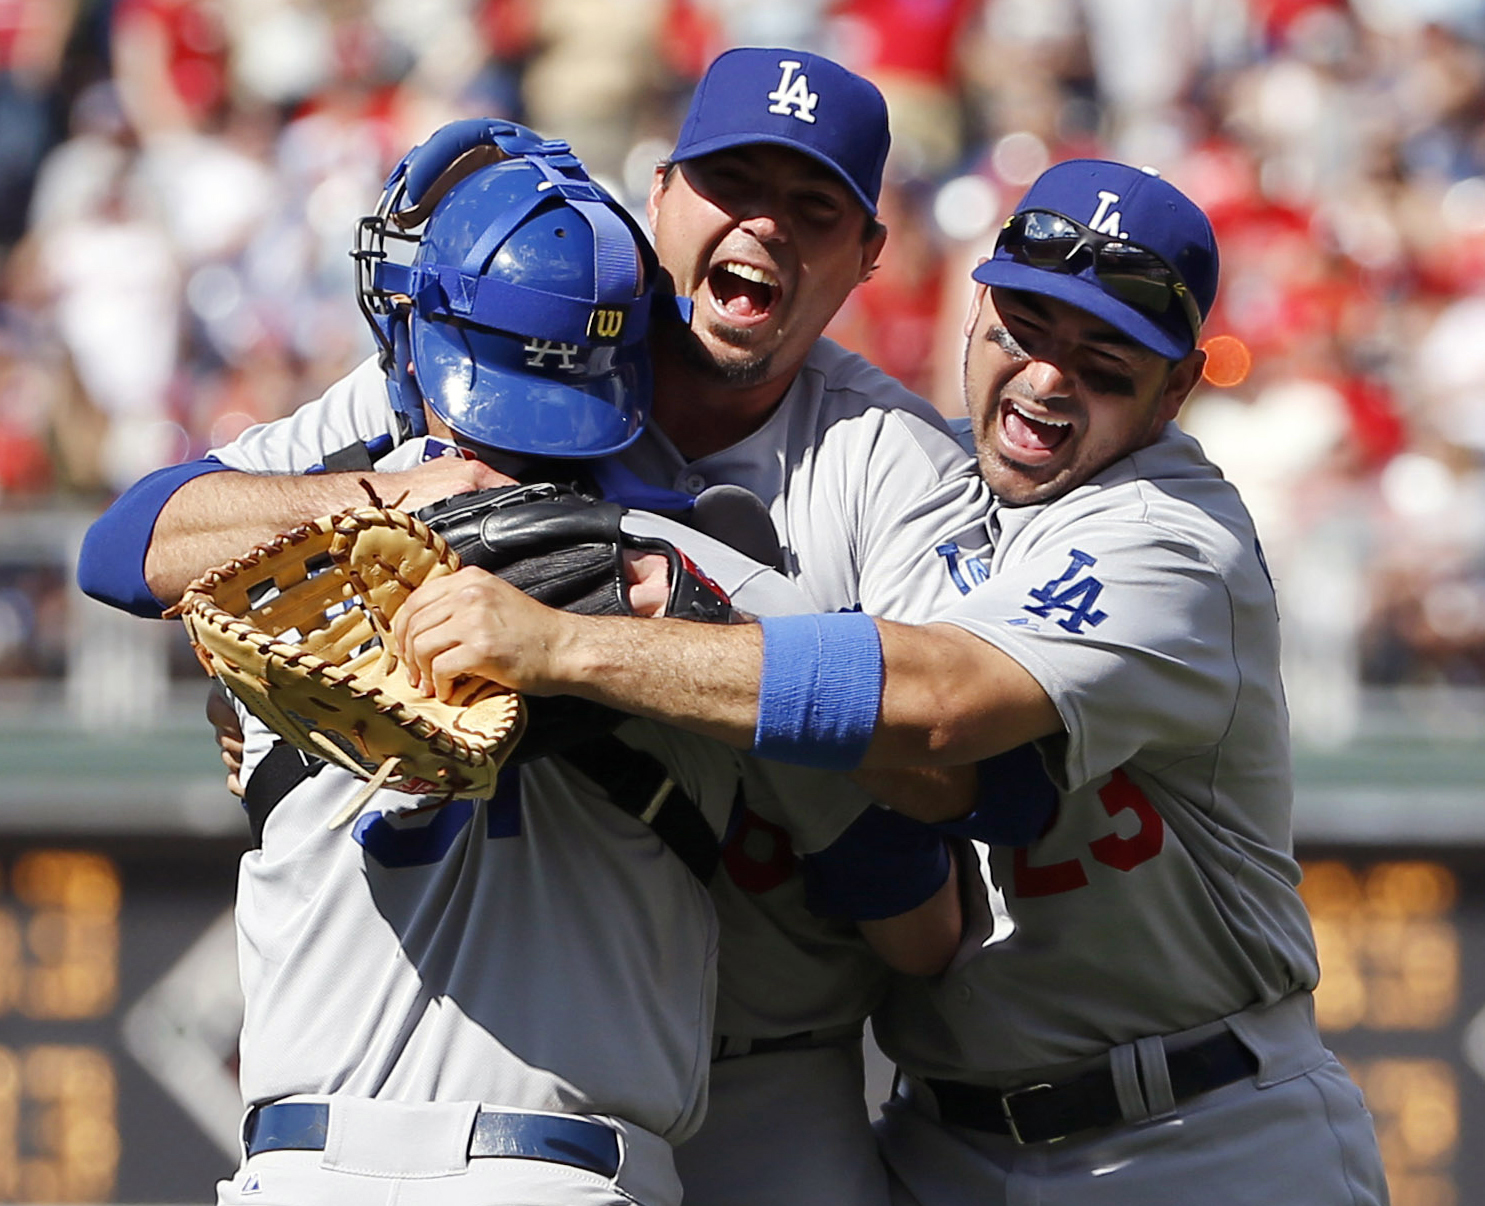 Los Angeles Dodgers starting pitcher Josh Beckett, center, celebrates with catcher Drew Butera, left, and first baseman Adrian Gonzalez after pitching a no-hitter baseball game against the Philadelphia Phillies, Sunday, May 25, 2014, in Philadelphia.